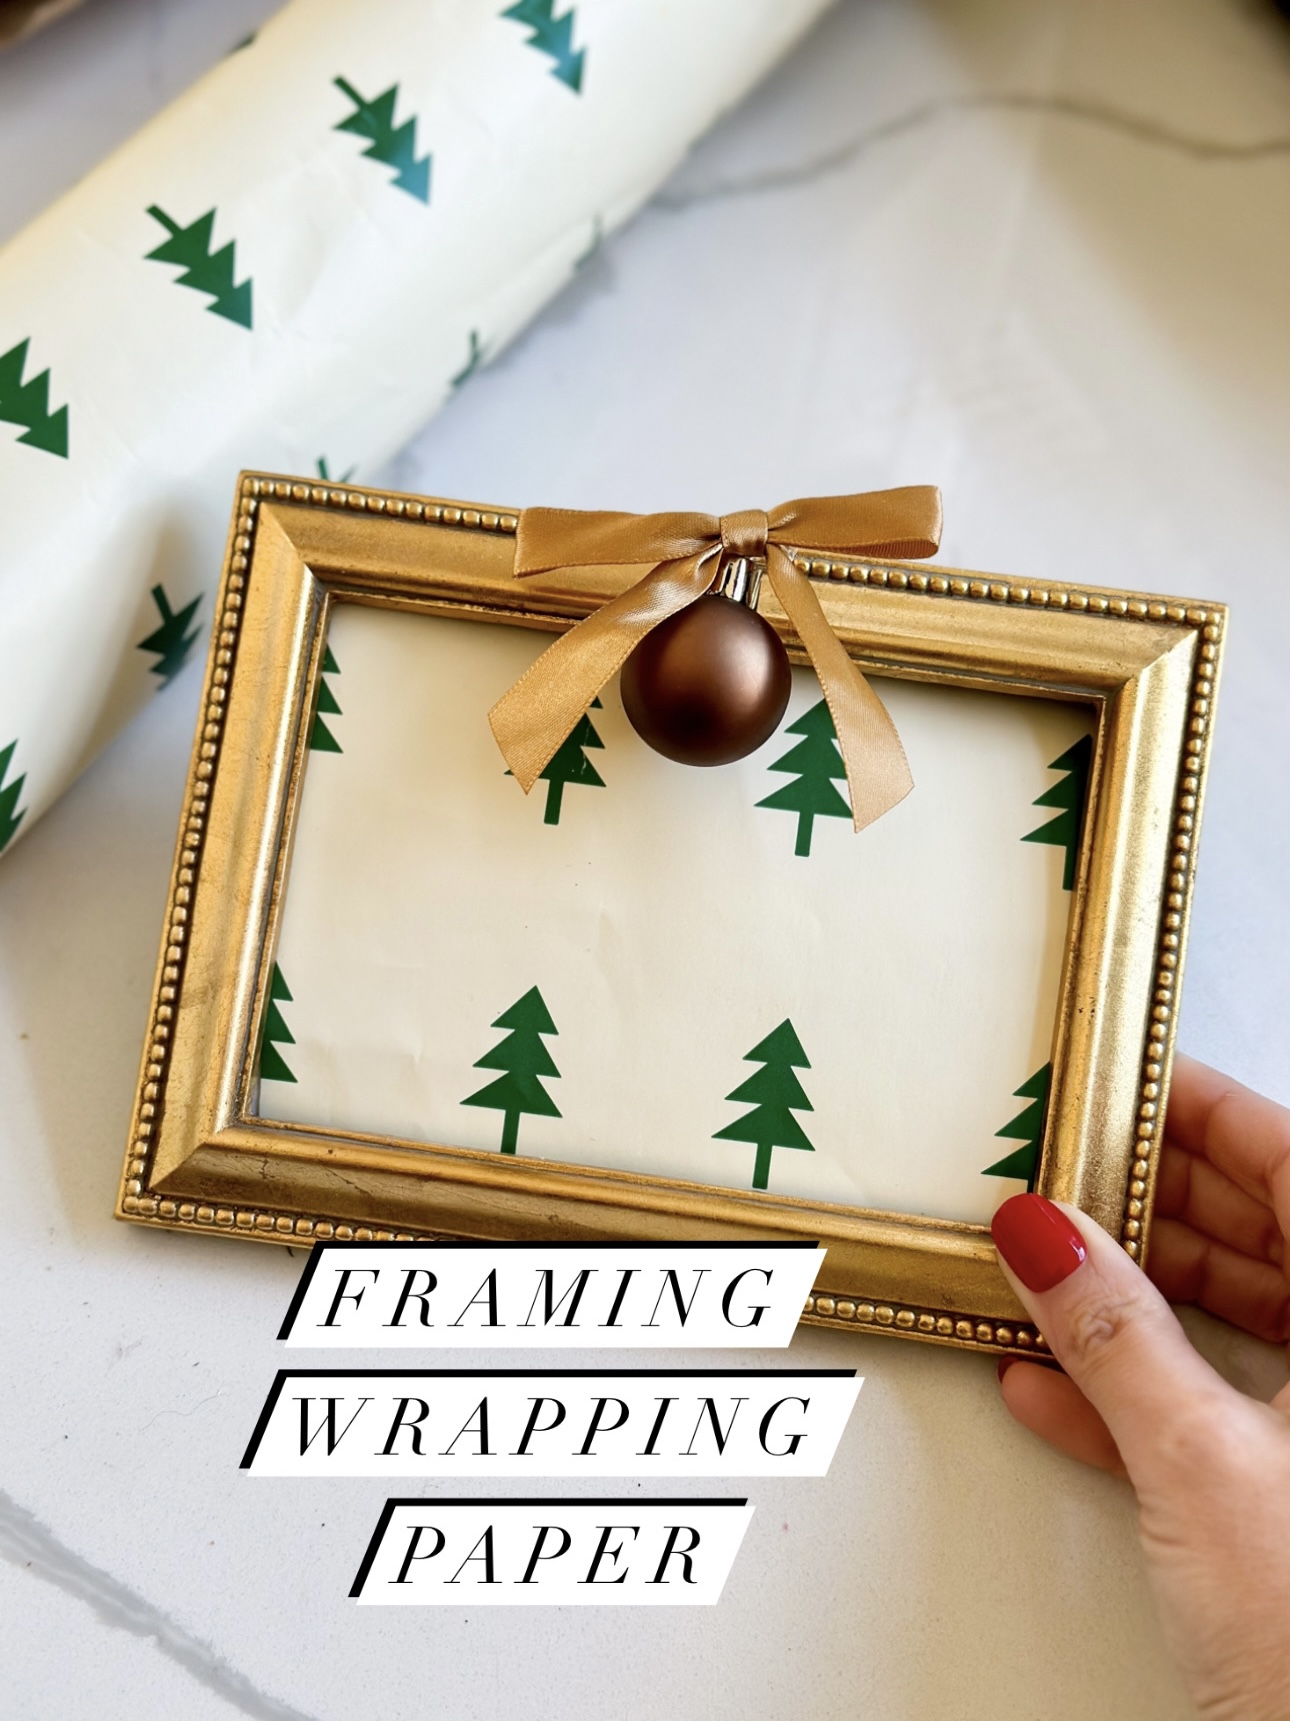 easy and budget friendly ways to decorate for christmas, decorating with bows, decorating art for christmas, christmas decor ideas, bows on frames, decorating art for christmas, christmas diy, framing wrapping paper